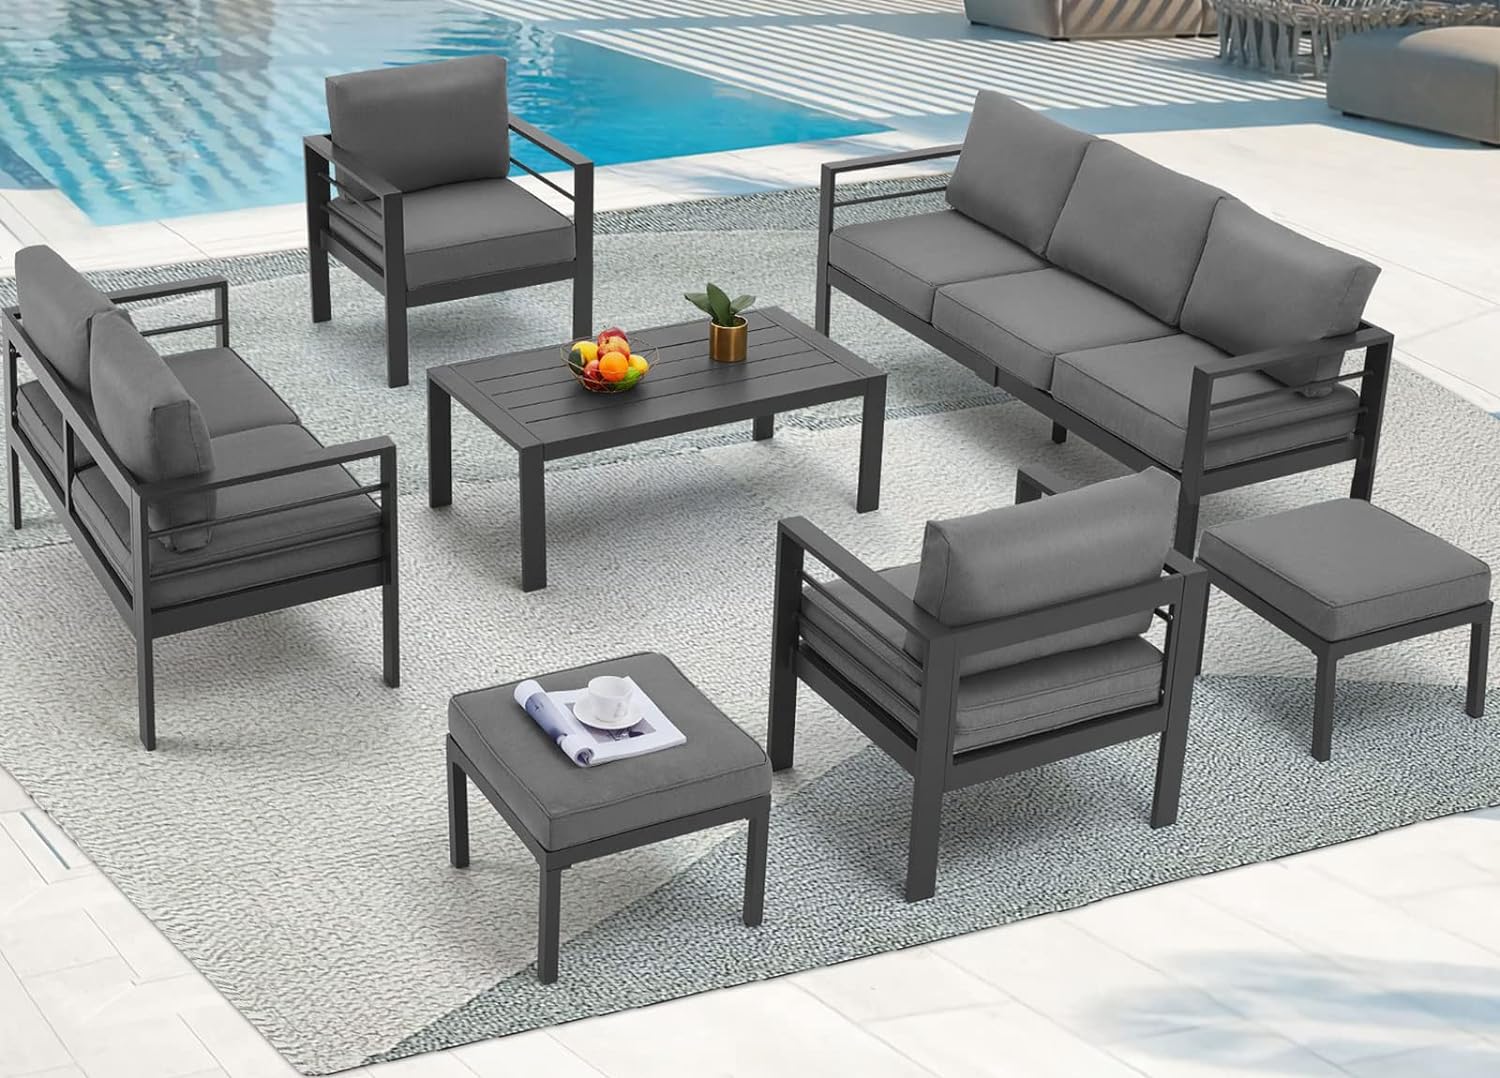 AECOJOY Aluminum Modern Patio Furniture with Coffee Table, 7 Pieces Outdoor Conversation Set with Dark Grey Cushions for Balcony, Porch, Lawn and More